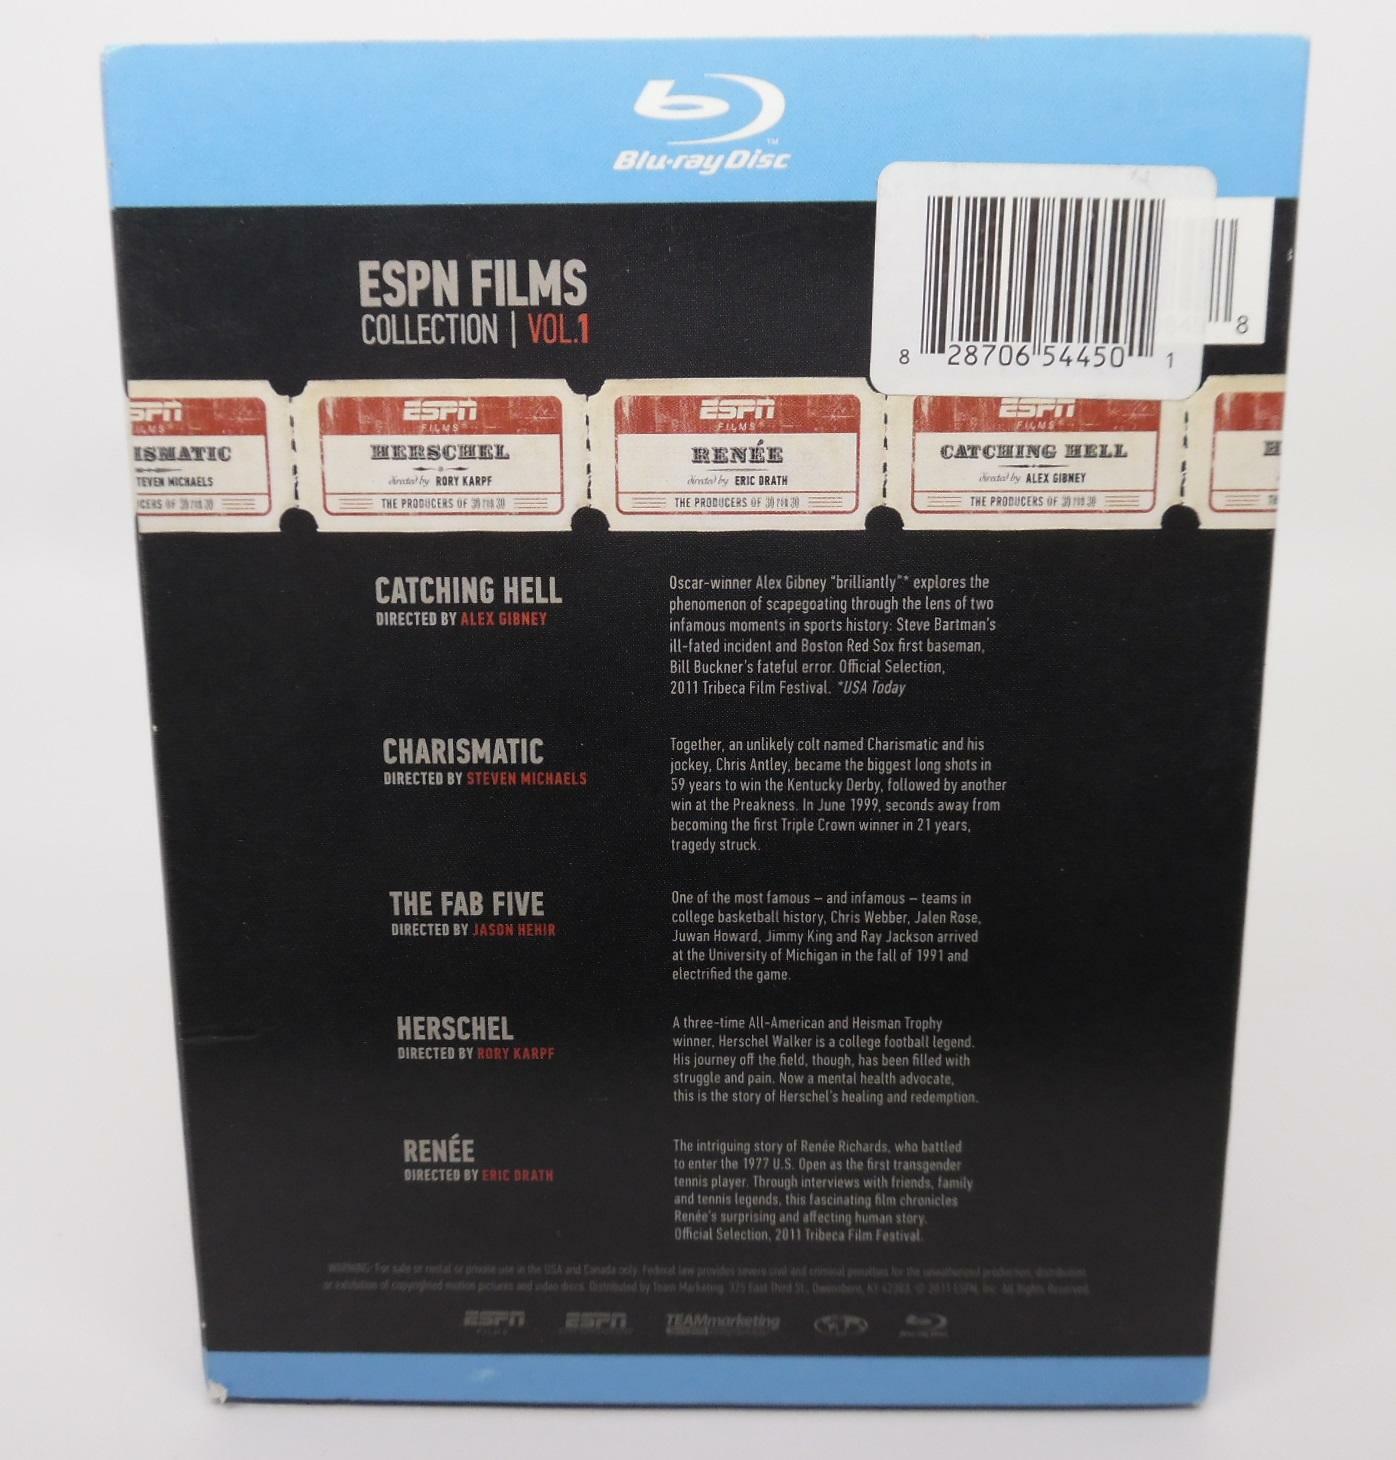 ESPN Films: 2011 Collection Fab 5 / Herschel / Renee / Charismatic / CatchingHell (Blu-ray) - image 2 of 3